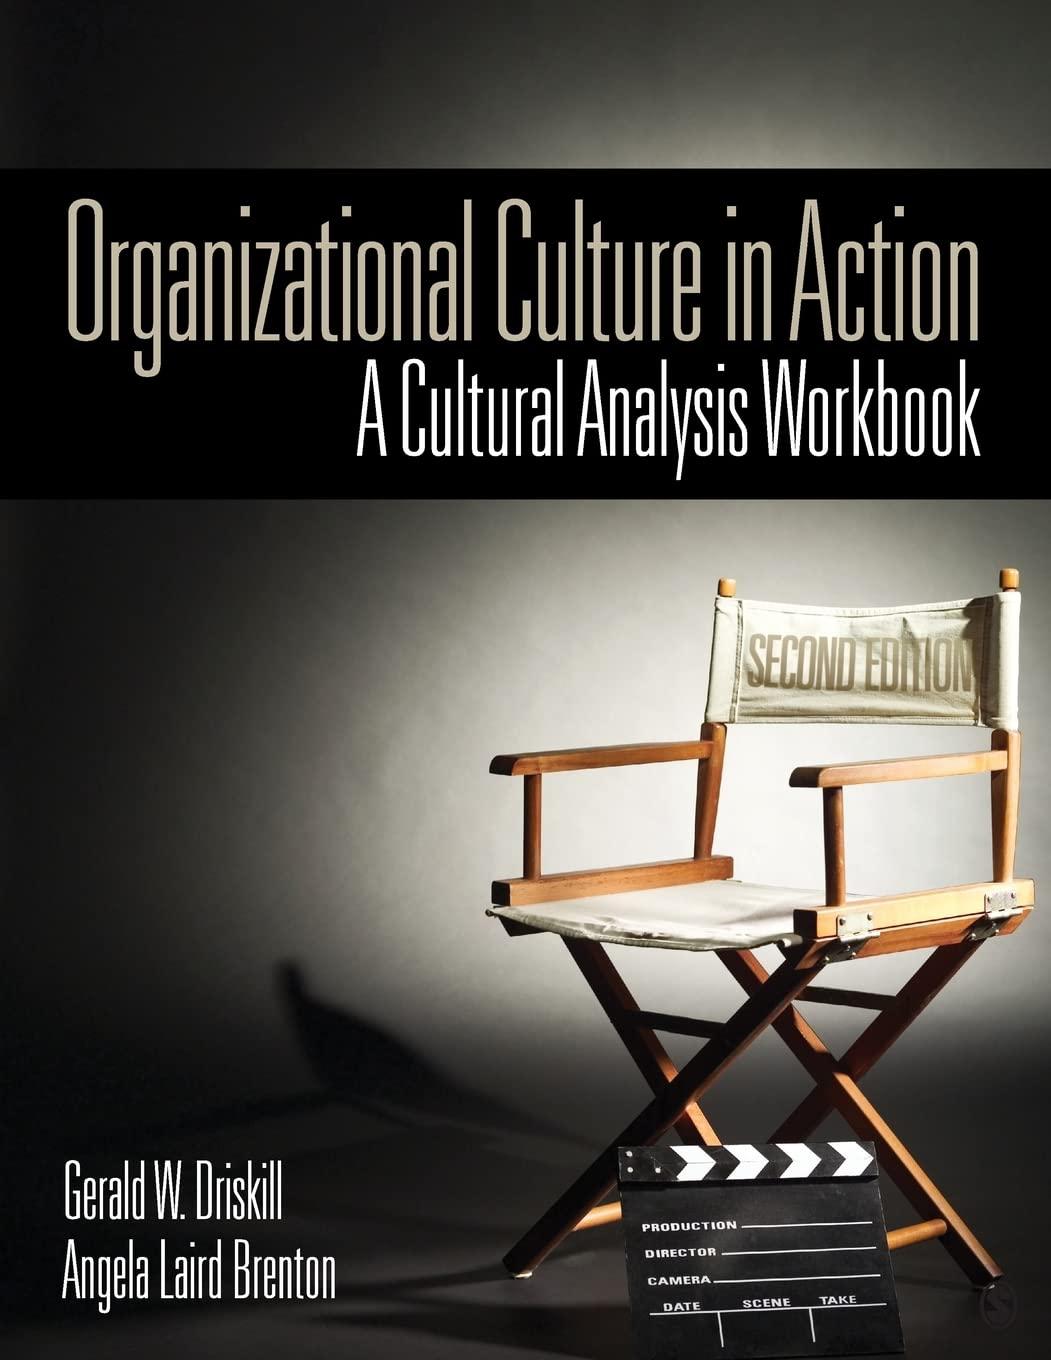 organizational culture in action a cultural analysis workbook 2nd edition gerald w. driskill, angela laird